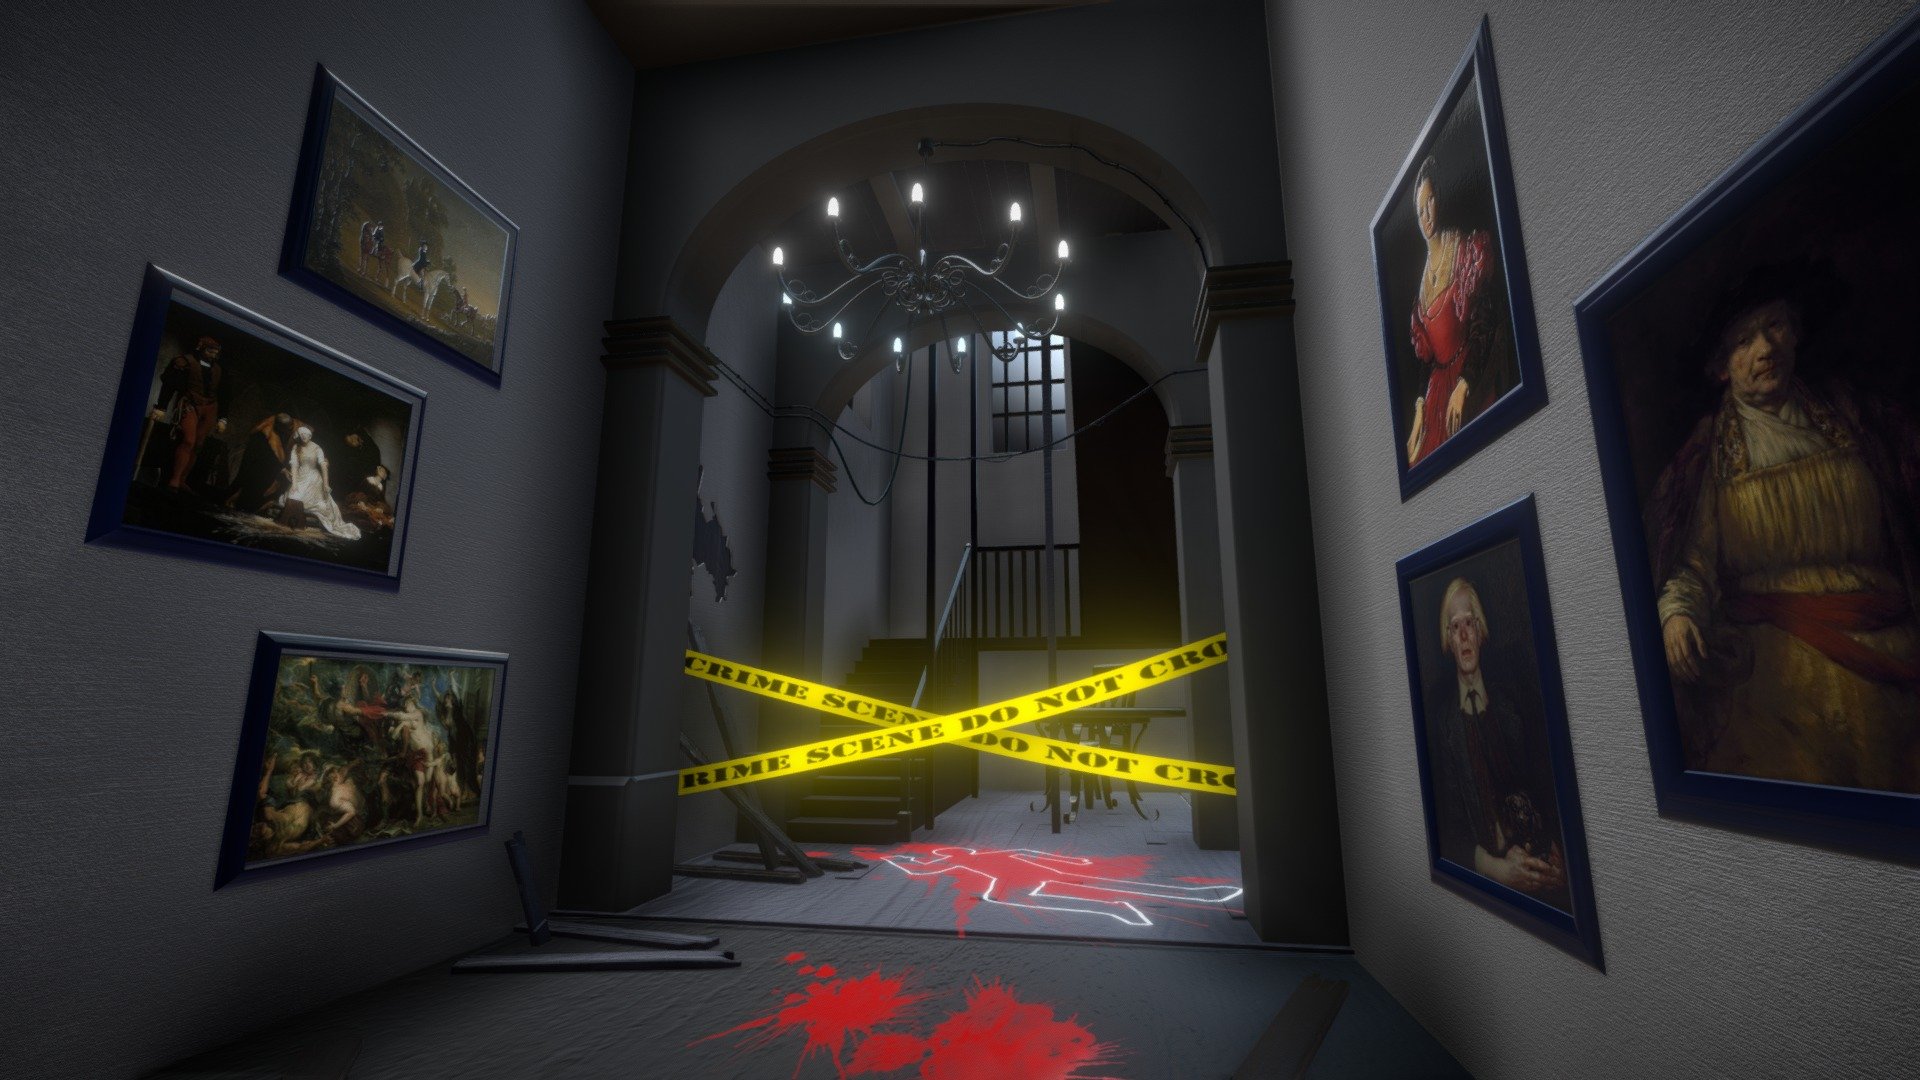 (Concept art)
Concept ready for animation, games and VR / AR projects. Available in any file format including FBX, OBJ, MAX, 3DS, C4D. (Tx,BumpMap)
Enjoy! - Crime scene - Buy Royalty Free 3D model by Pedram Ashoori (@pedramashoori) 3d model